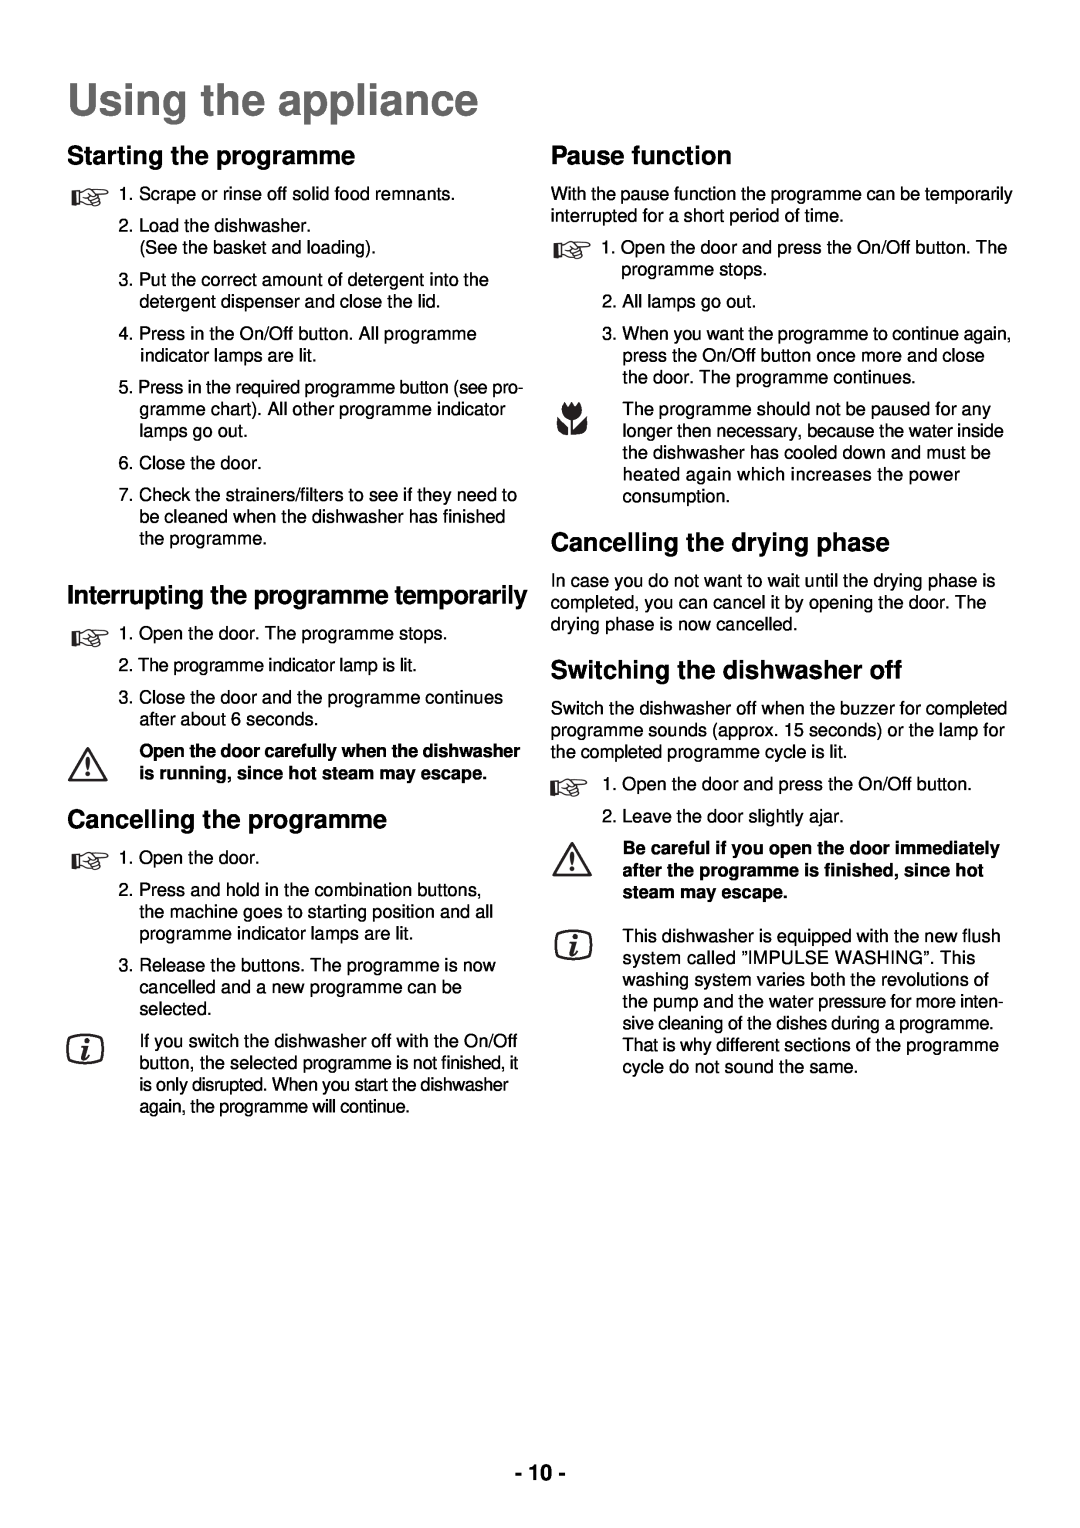 Electrolux ESL 2435 manual Using the appliance, Starting the programme, Cancelling the programme, Pause function 